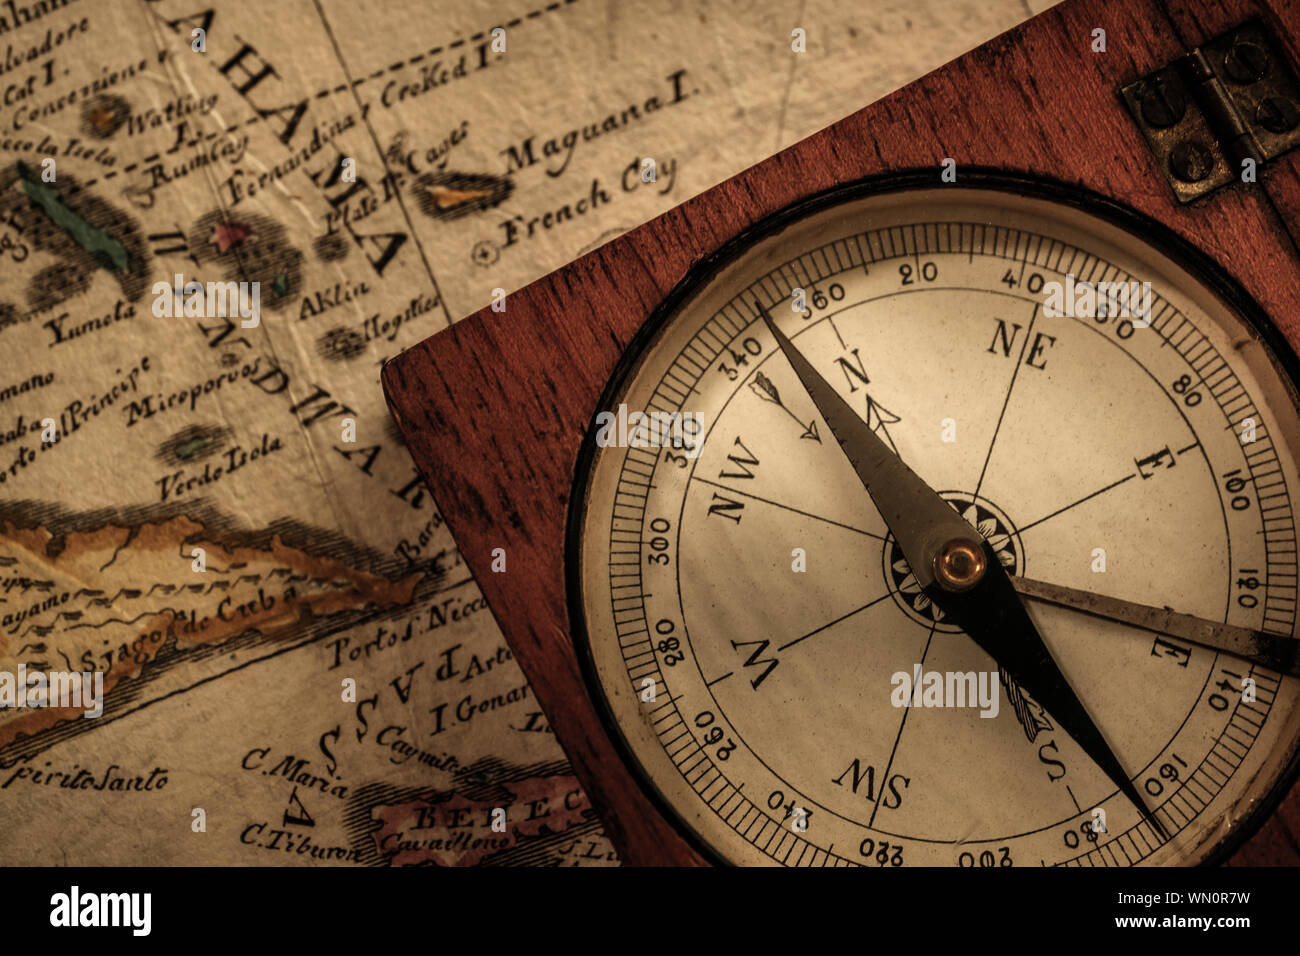 Antique compass on map Stock Photo